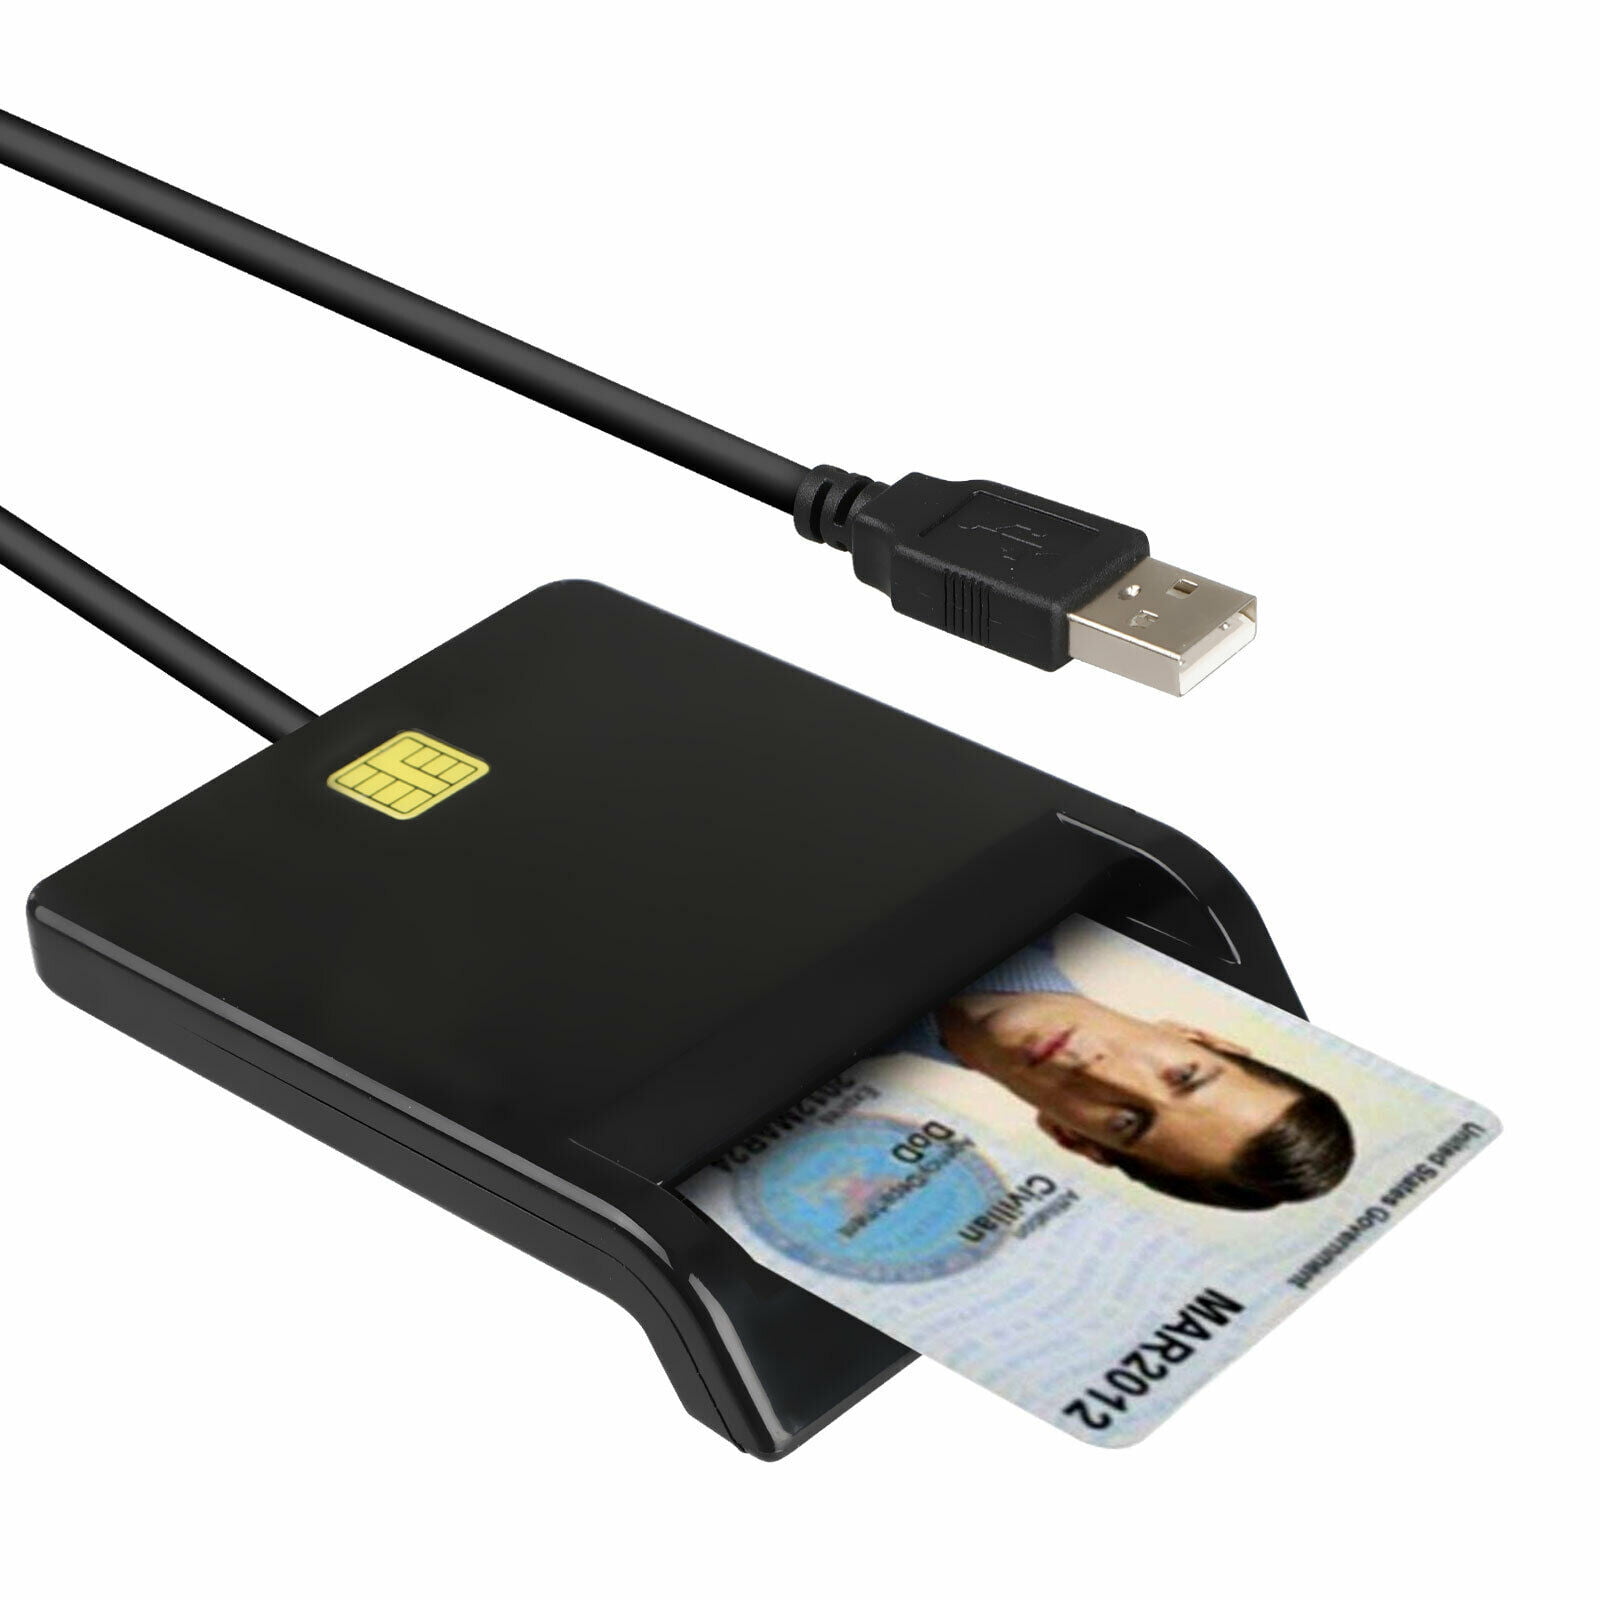 GemPlus GemPC Card Smart Card Reader Writer CAC Military ID PCMCIA